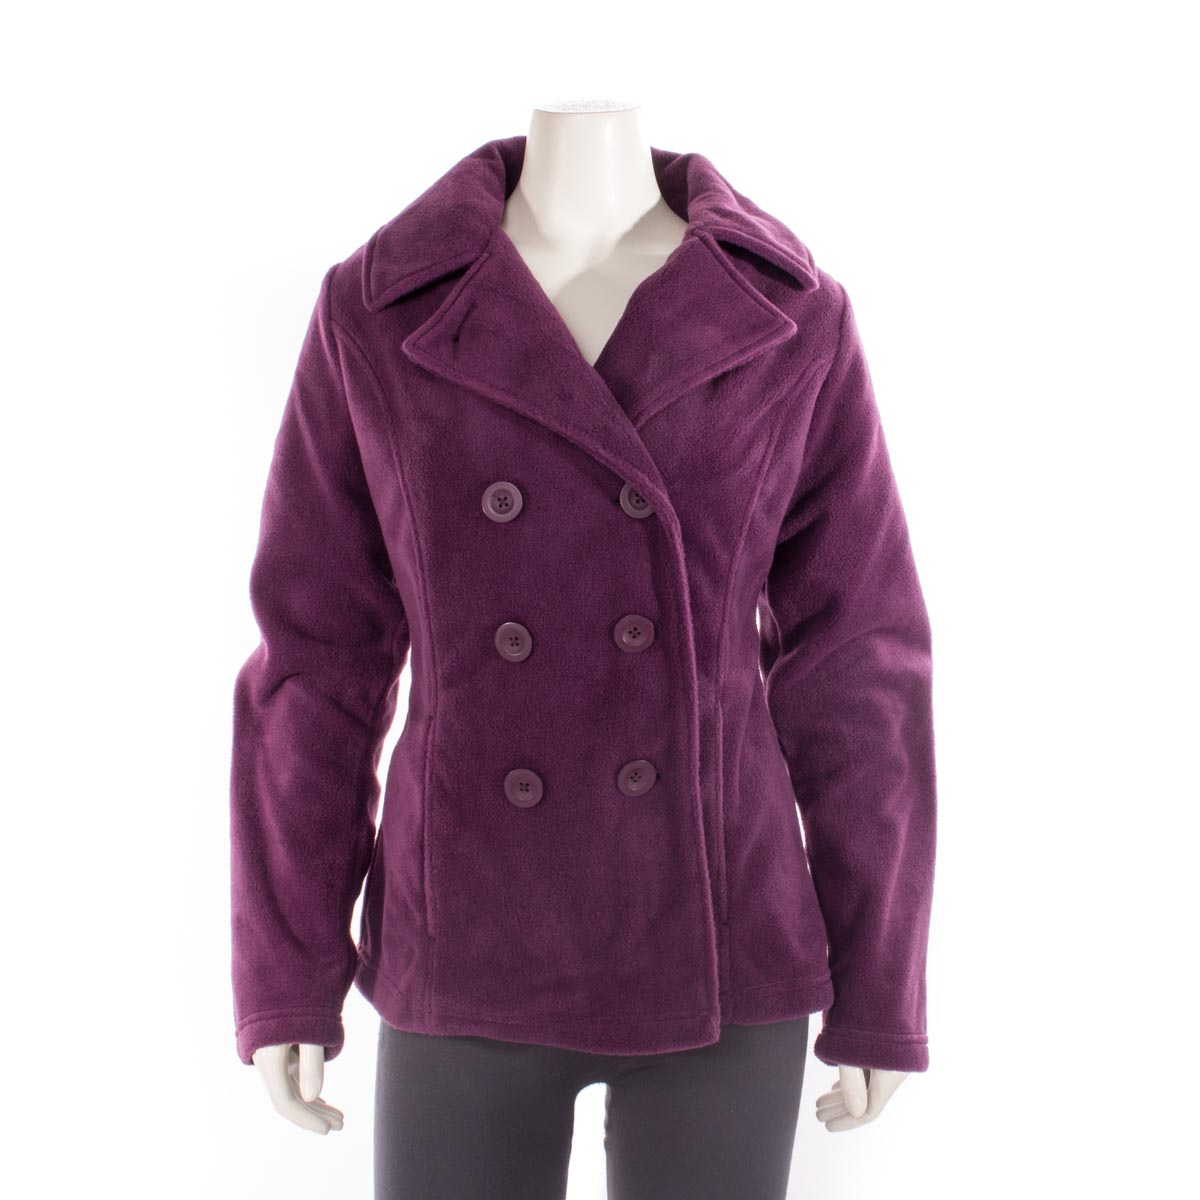 Columbia Women's Benton Springs Pea Coat Extended Sizes Discontinued Pricing